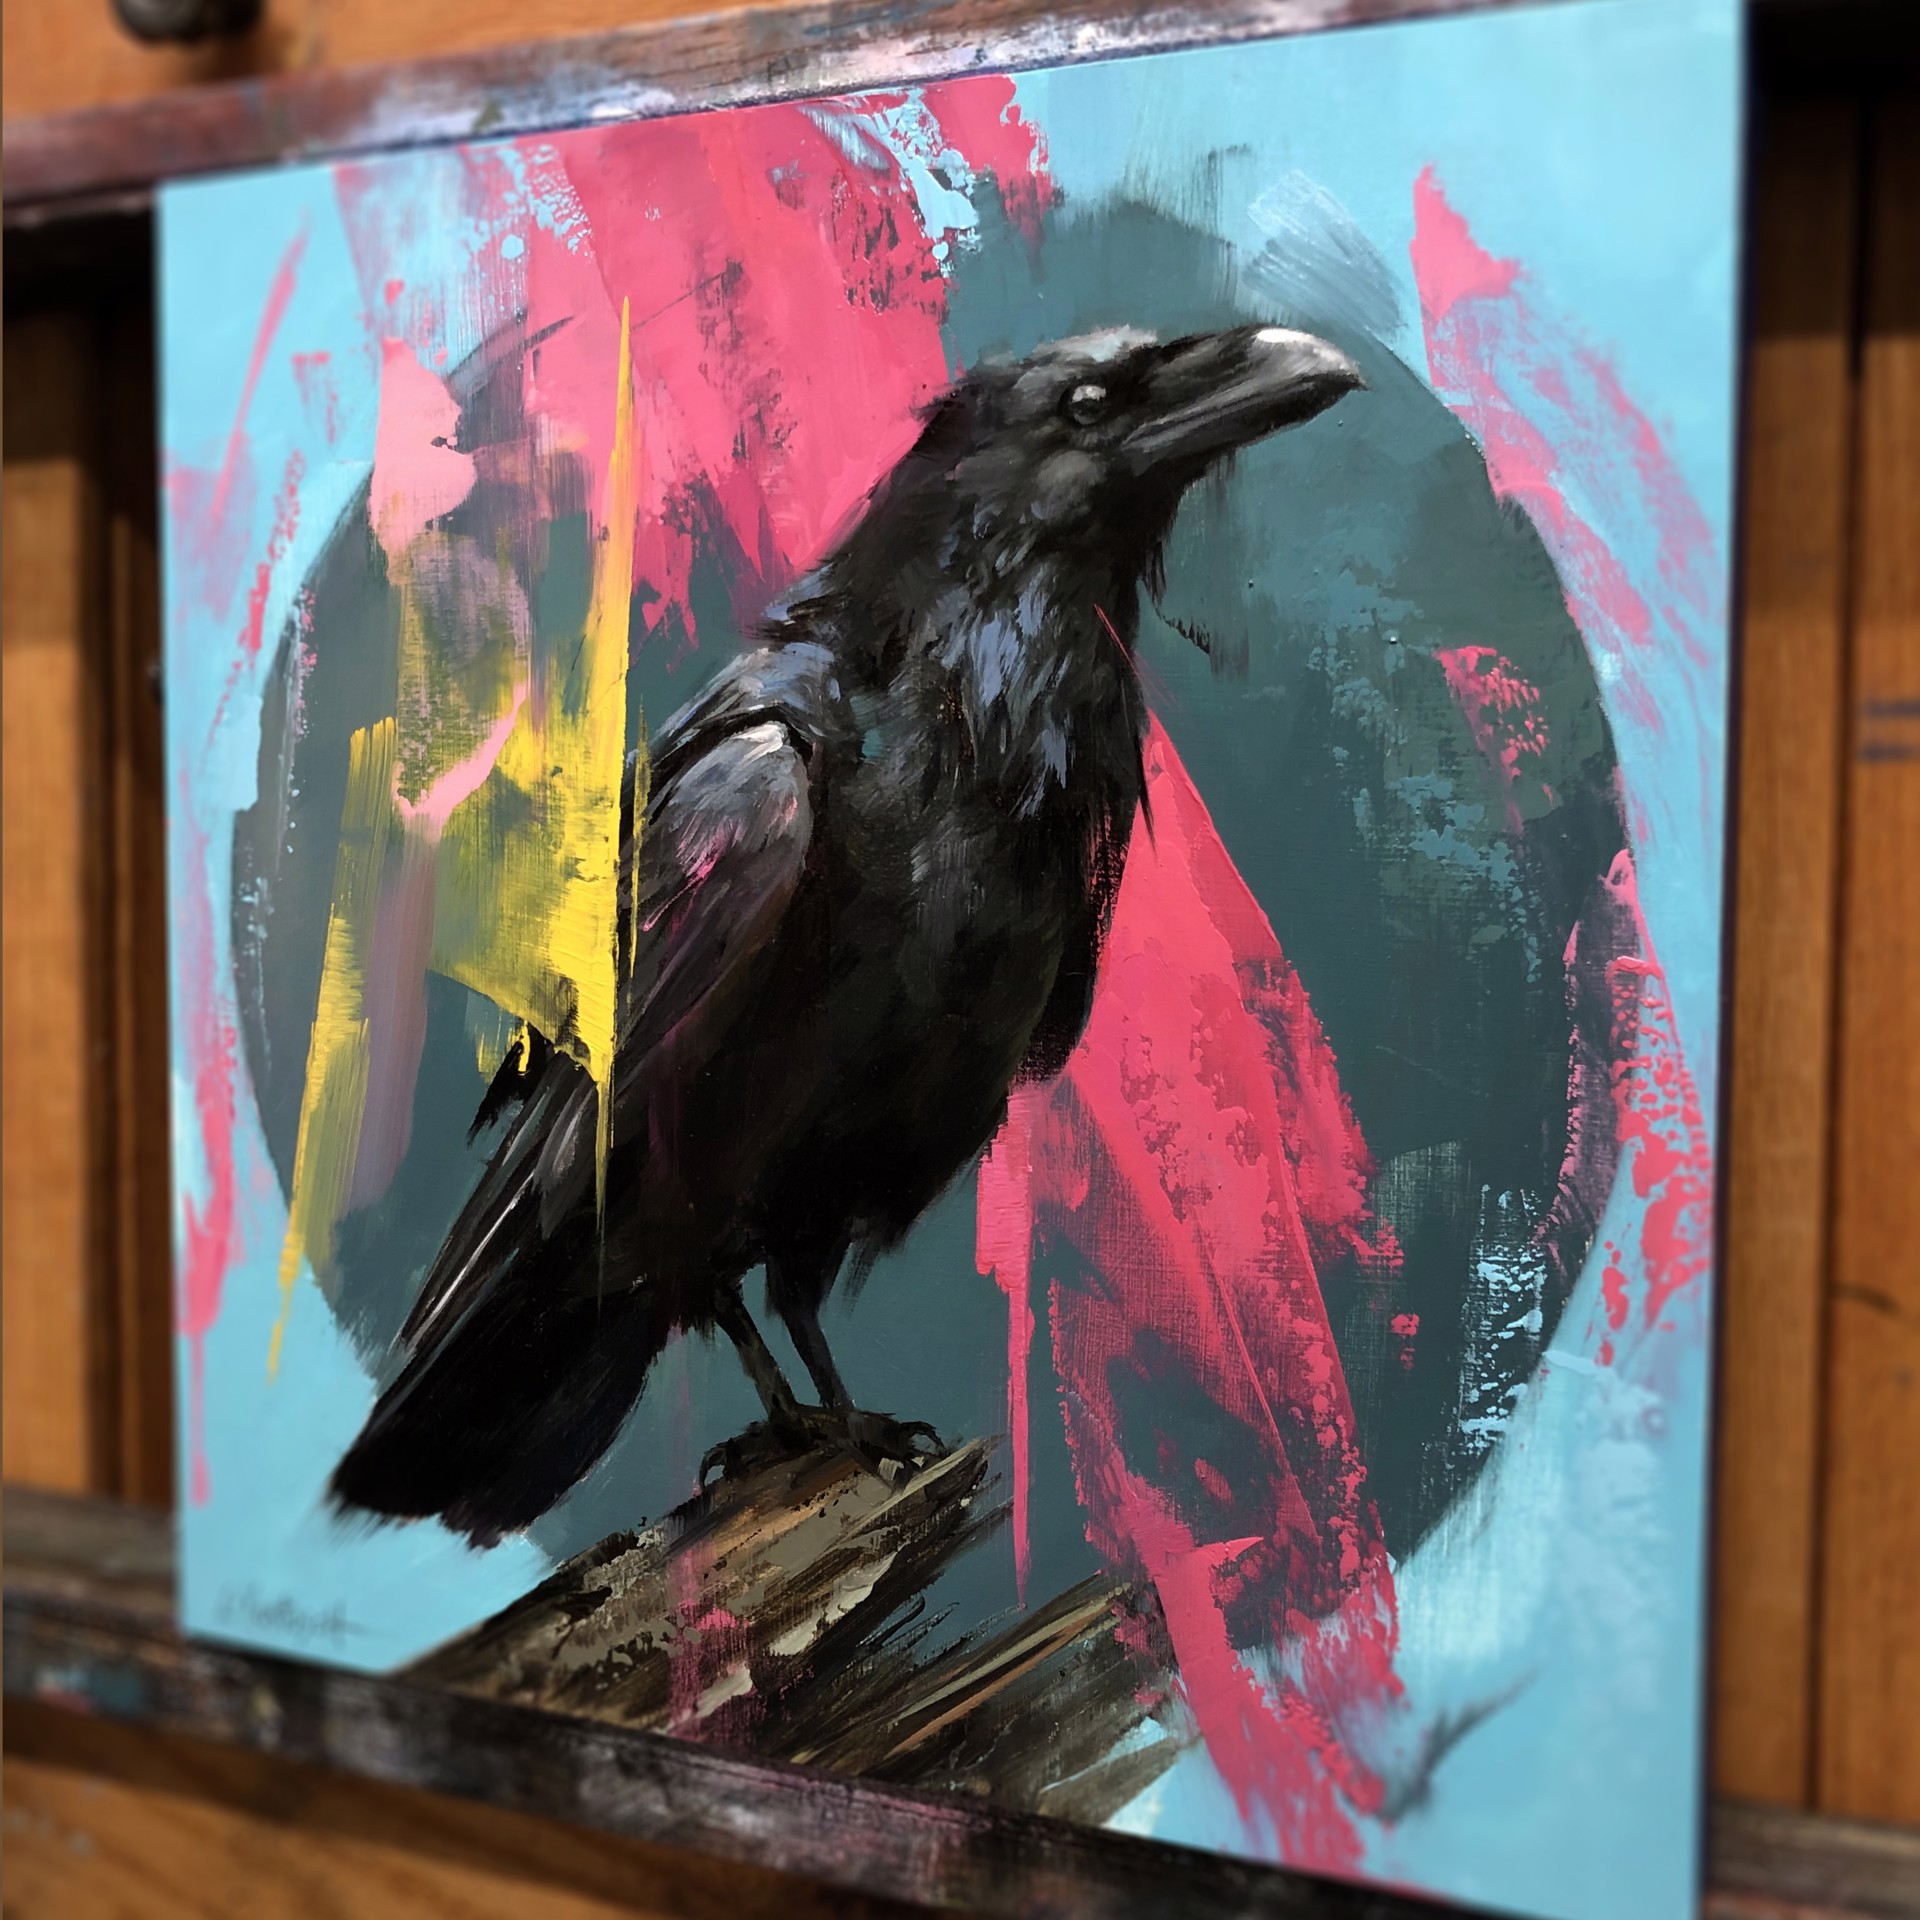 The Raven on Shades of Turquoise by Lindsey Kustusch